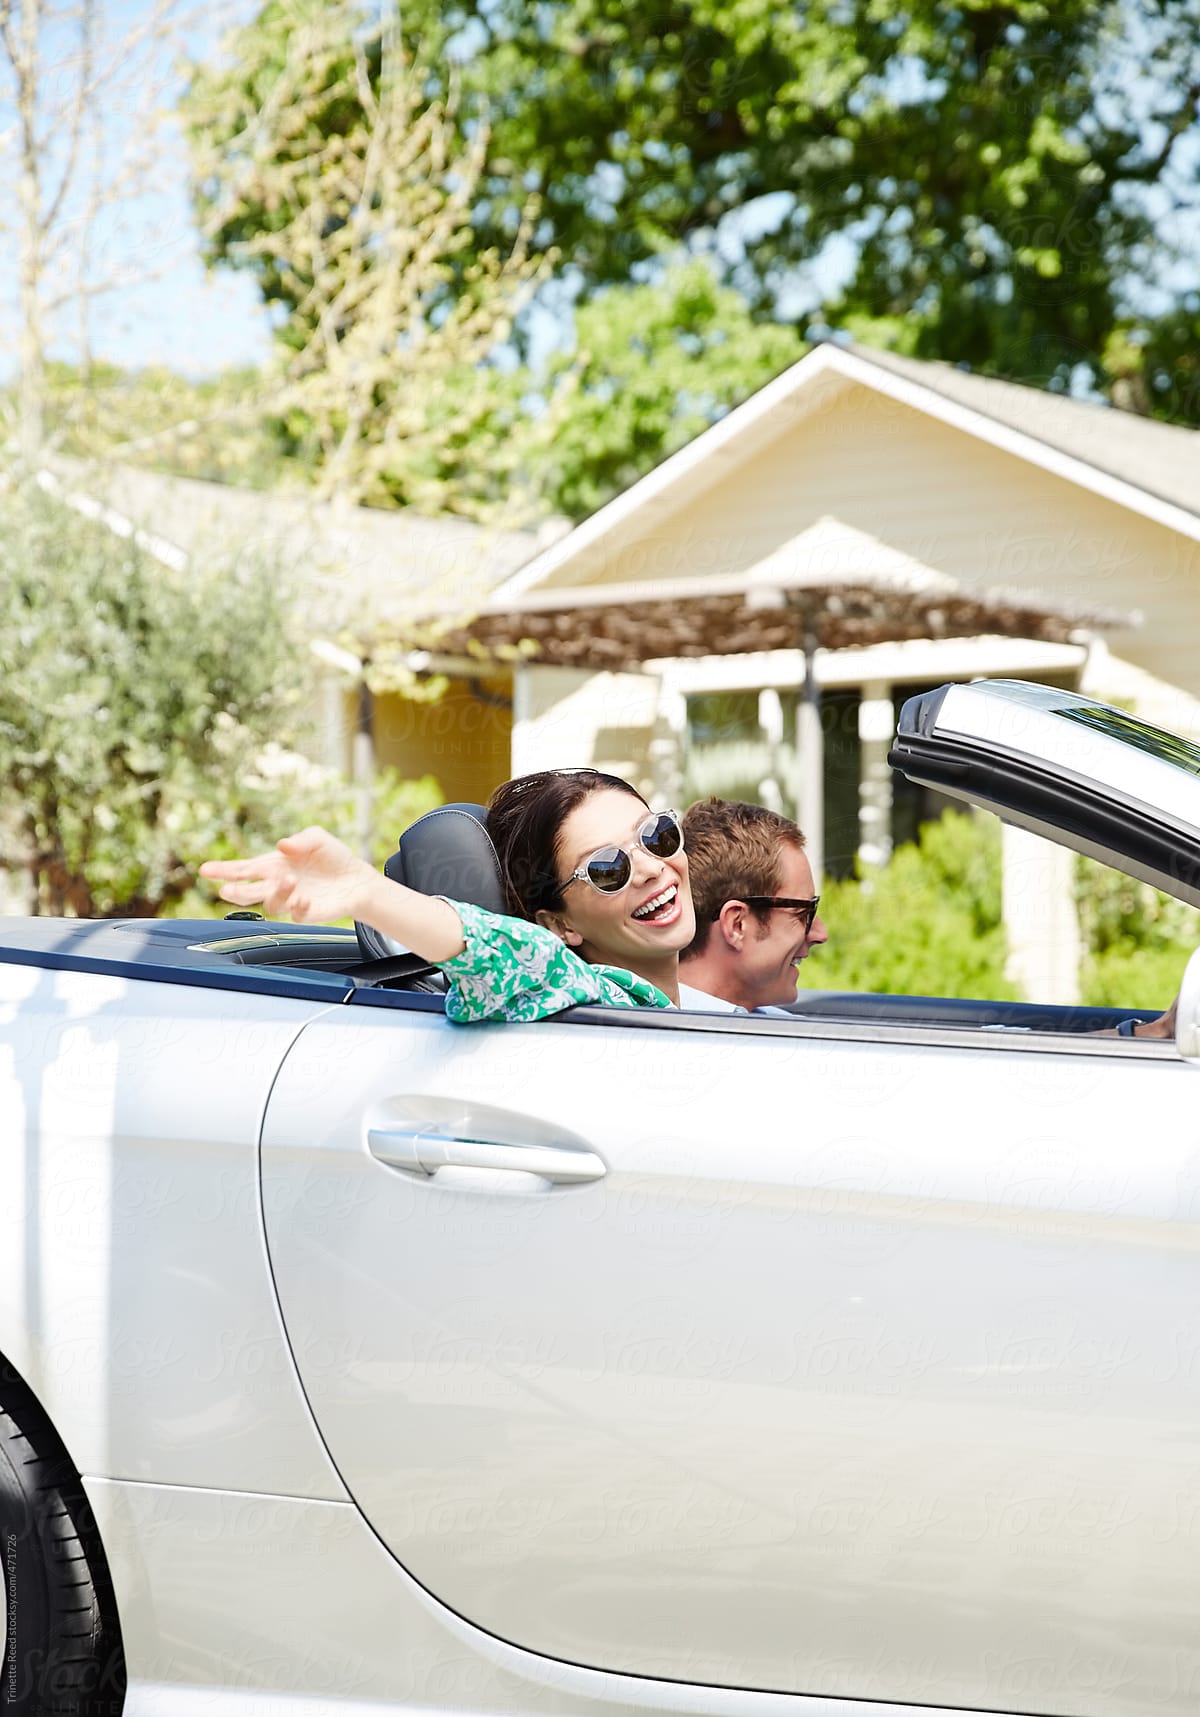 Couple on vacation In Convertible car